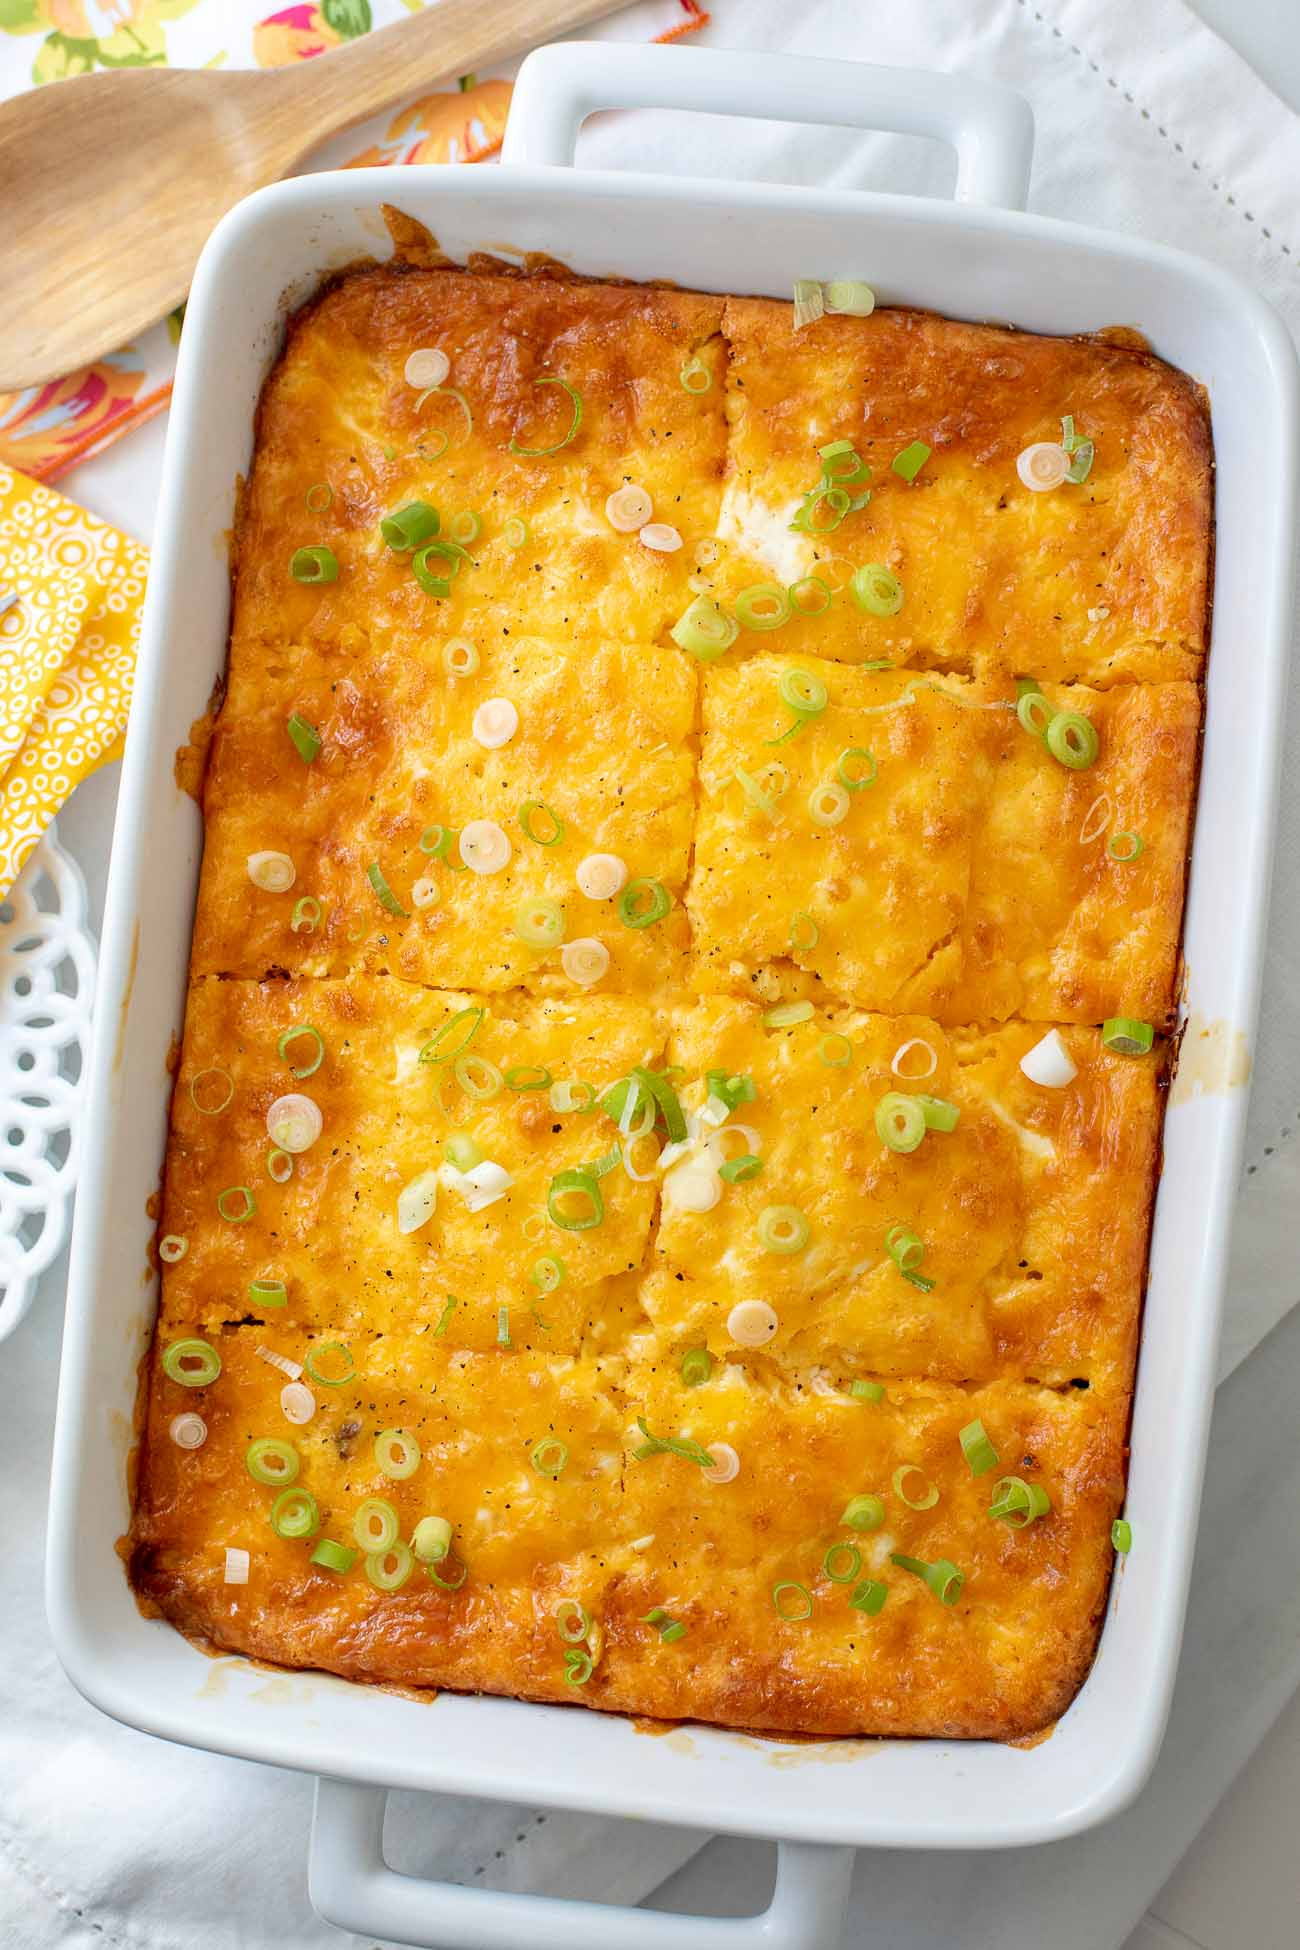 Low Carb Keto Breakfast
 Keto Breakfast Casserole with Sausage and Eggs Low Carb